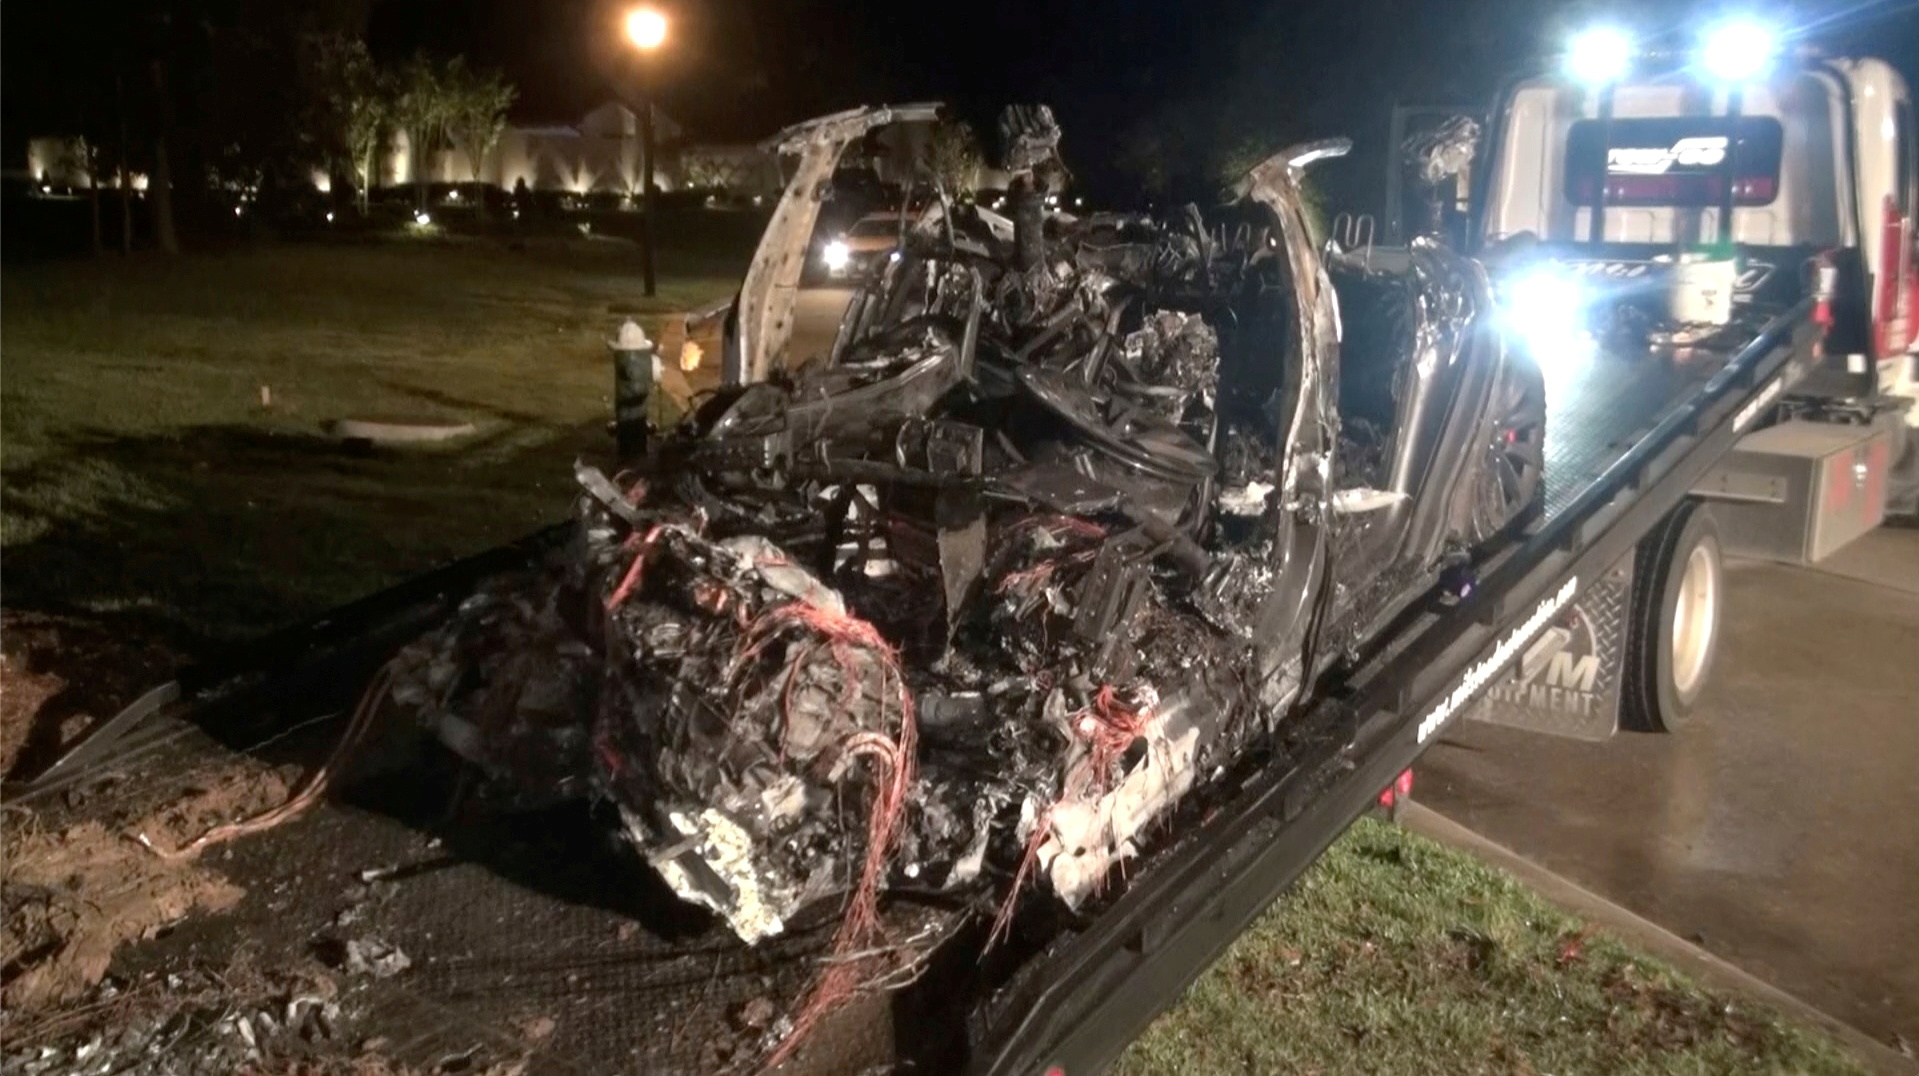 The remains of a Tesla vehicle are seen after it crashed in The Woodlands, Texas, April 17, 2021, in this still image from video obtained via social media. u00e2u20acu201d Screen capture of video by Scott J. Engle via Reuters